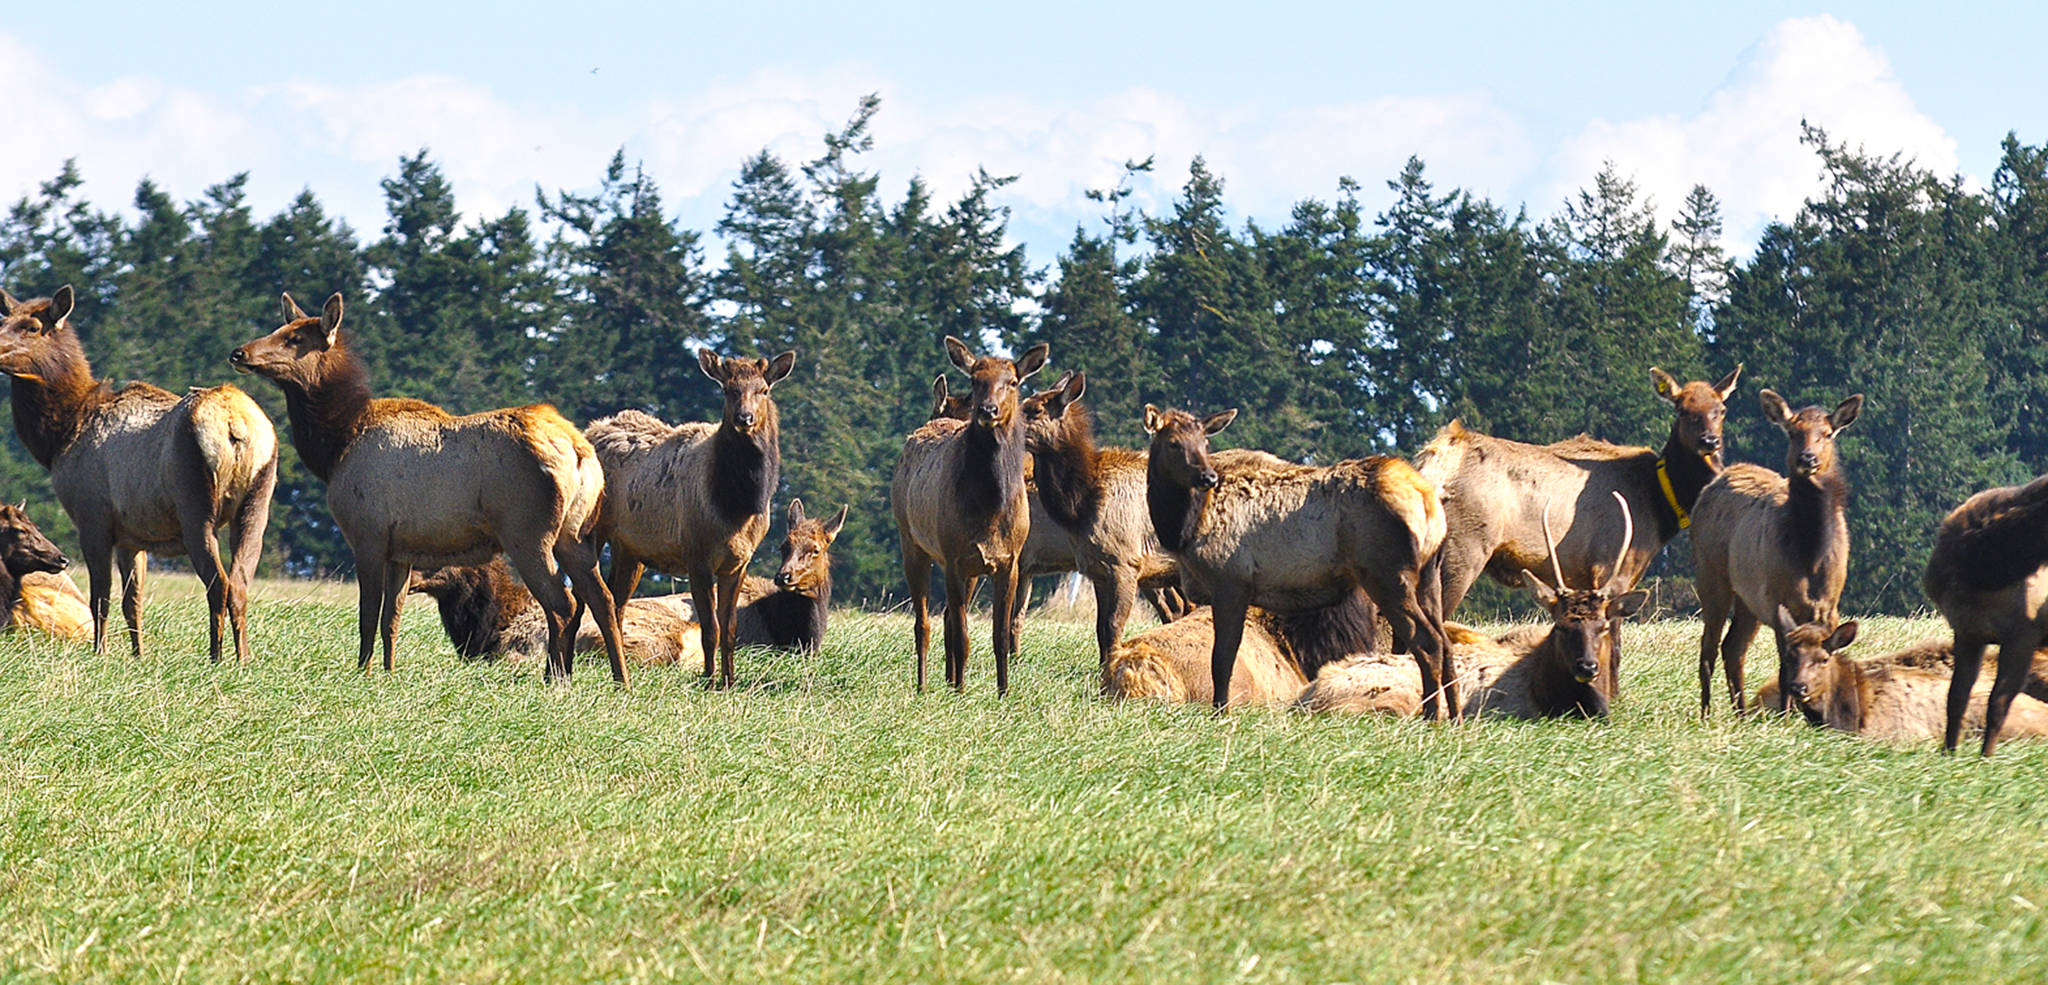 Sequim’s elk herd, seen here in 2013, reached about 100 total elk about 10 years ago before local farmers found the numbers were too large and hurt local crop production. State Department of Fish and Wildlife staff said the herd needs to be thinned again. (Jay Cline)